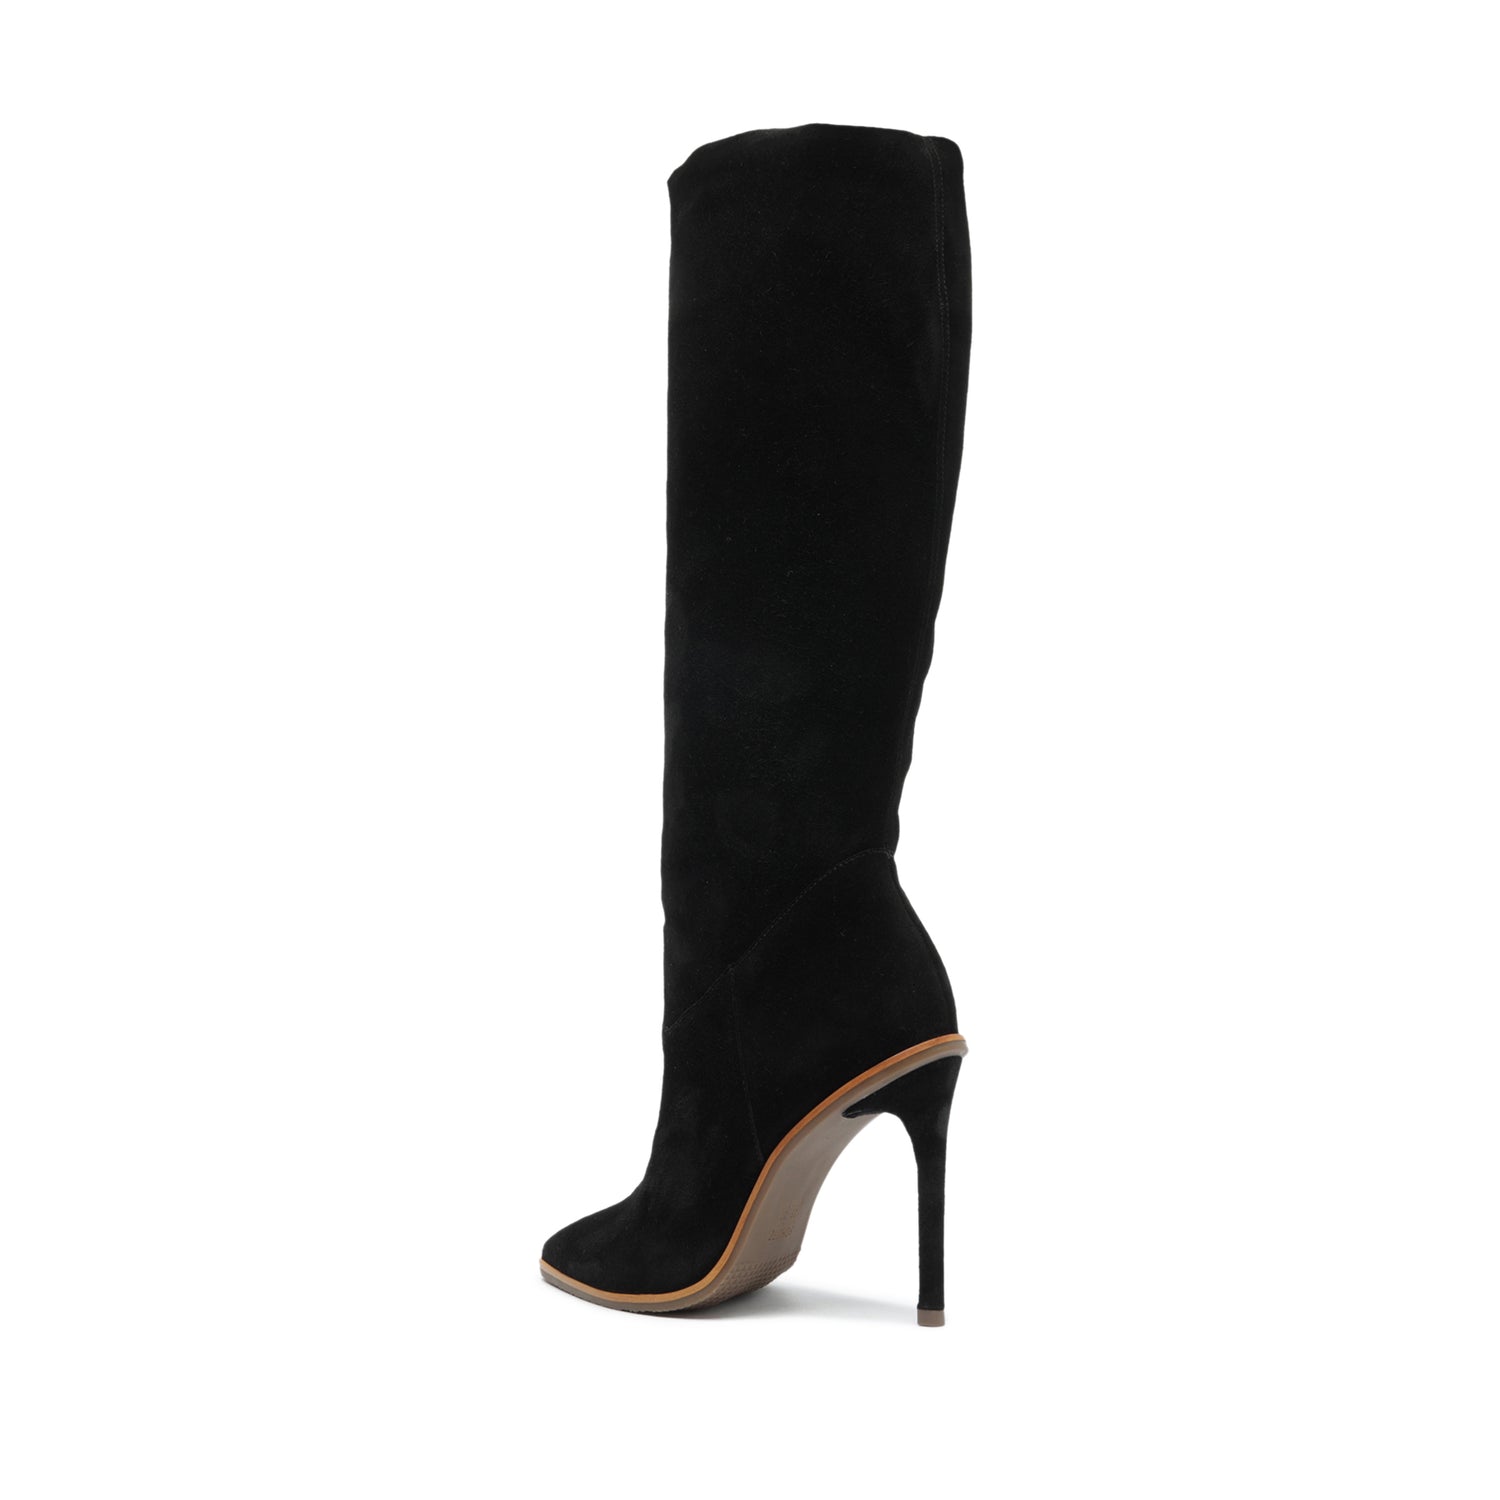 Cristin Suede Boot Boots Open Stock    - Schutz Shoes